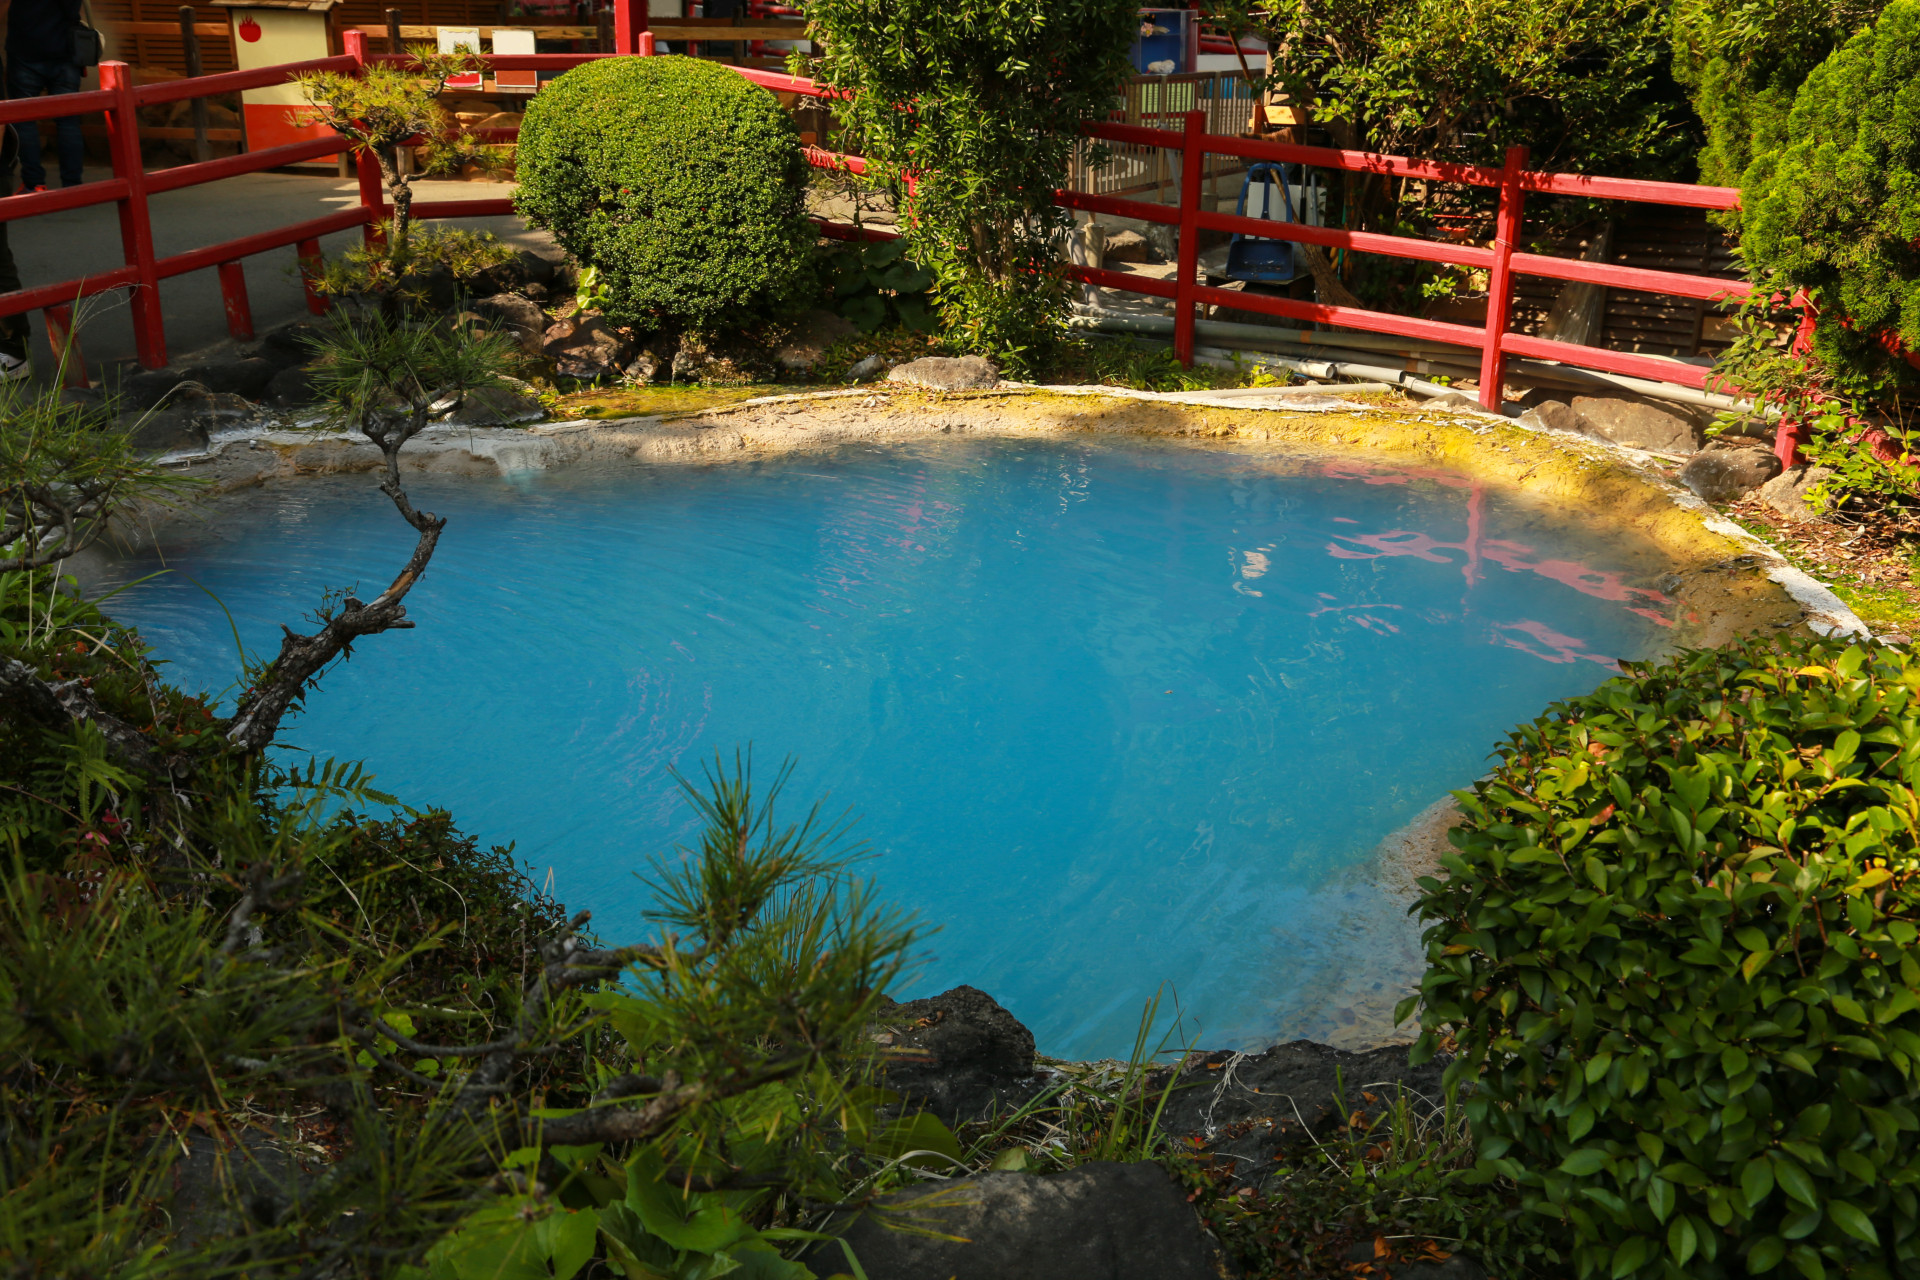 Kamado Jigoku means 'cooking pot hell' and takes its name from the boiling hot water in the springs.